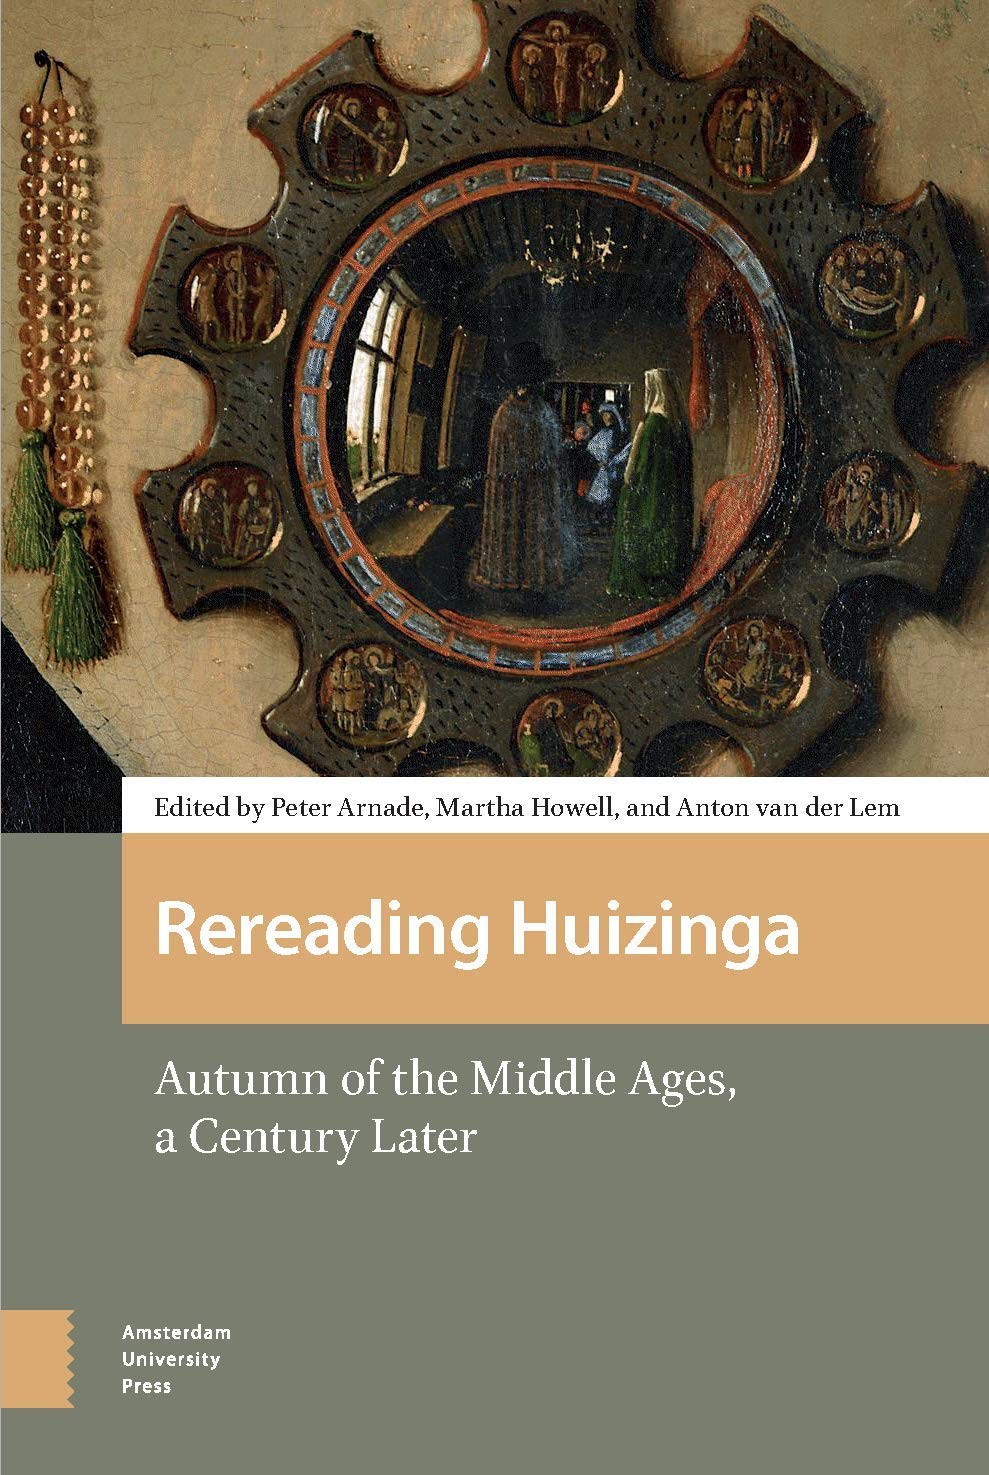 Book cover for "Rereading Huizinga: Autumn of the Middle Ages, a Century Later"